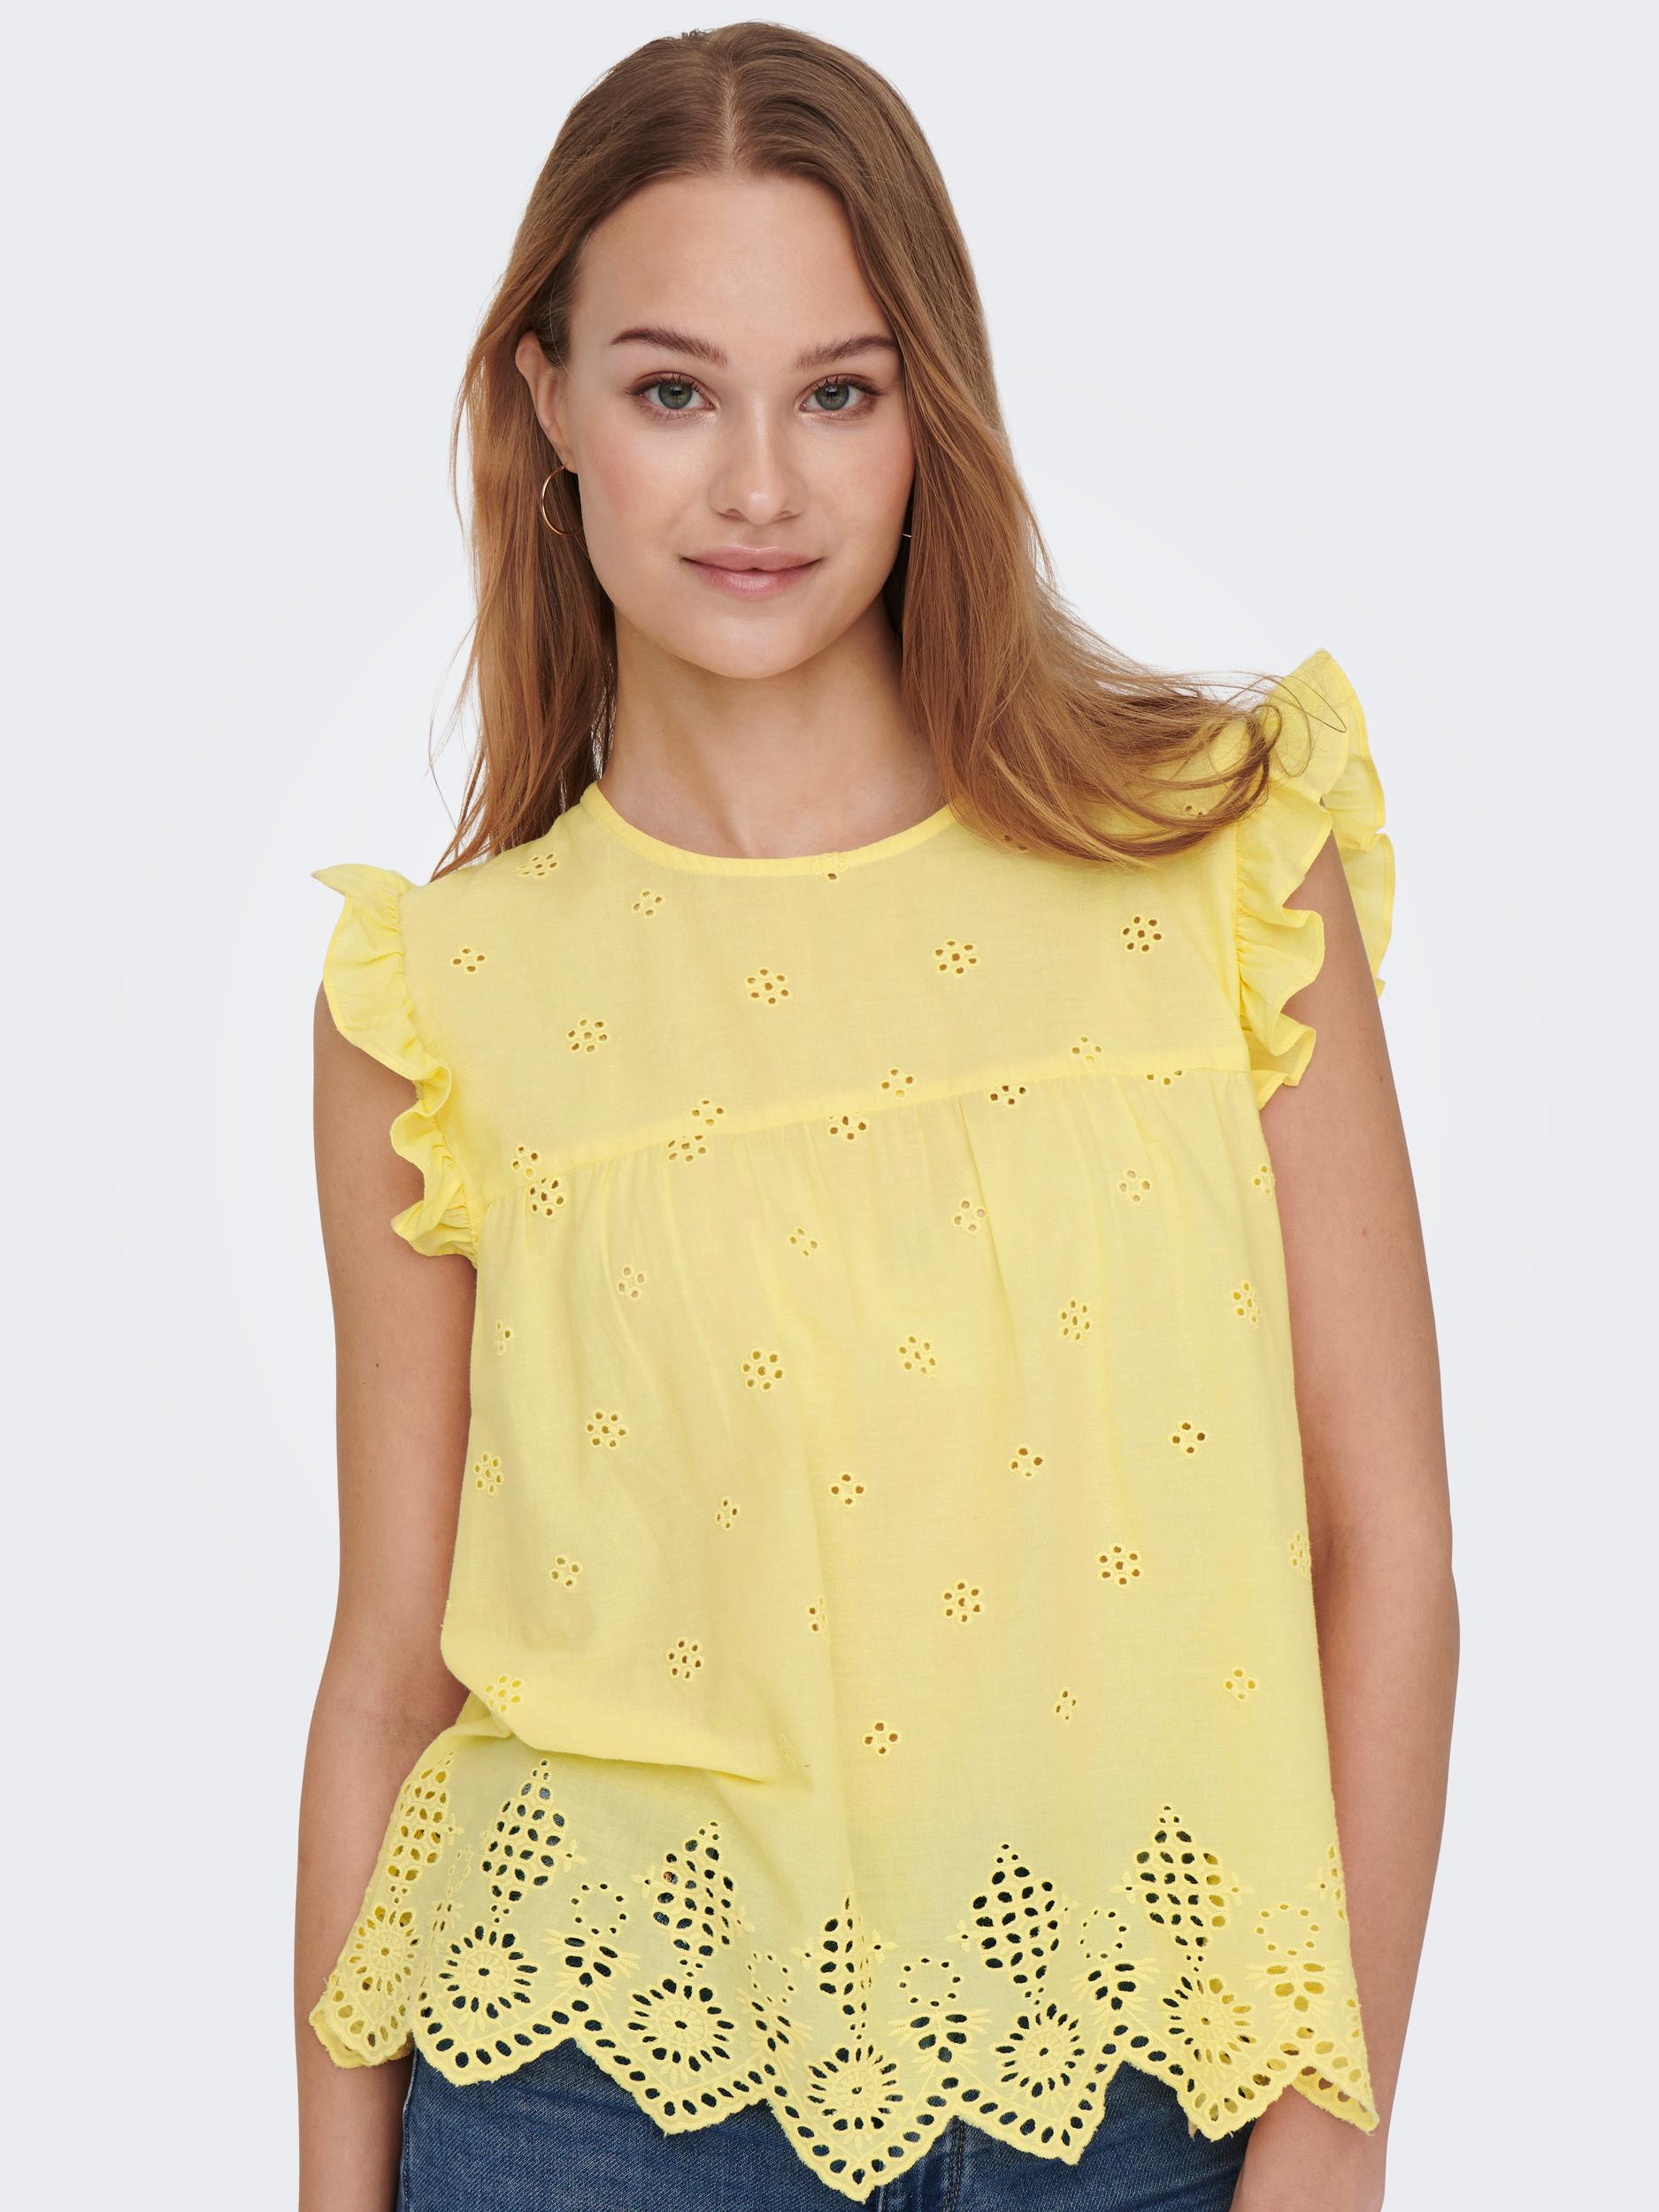 Only - Cotton top, Yellow, large image number 2